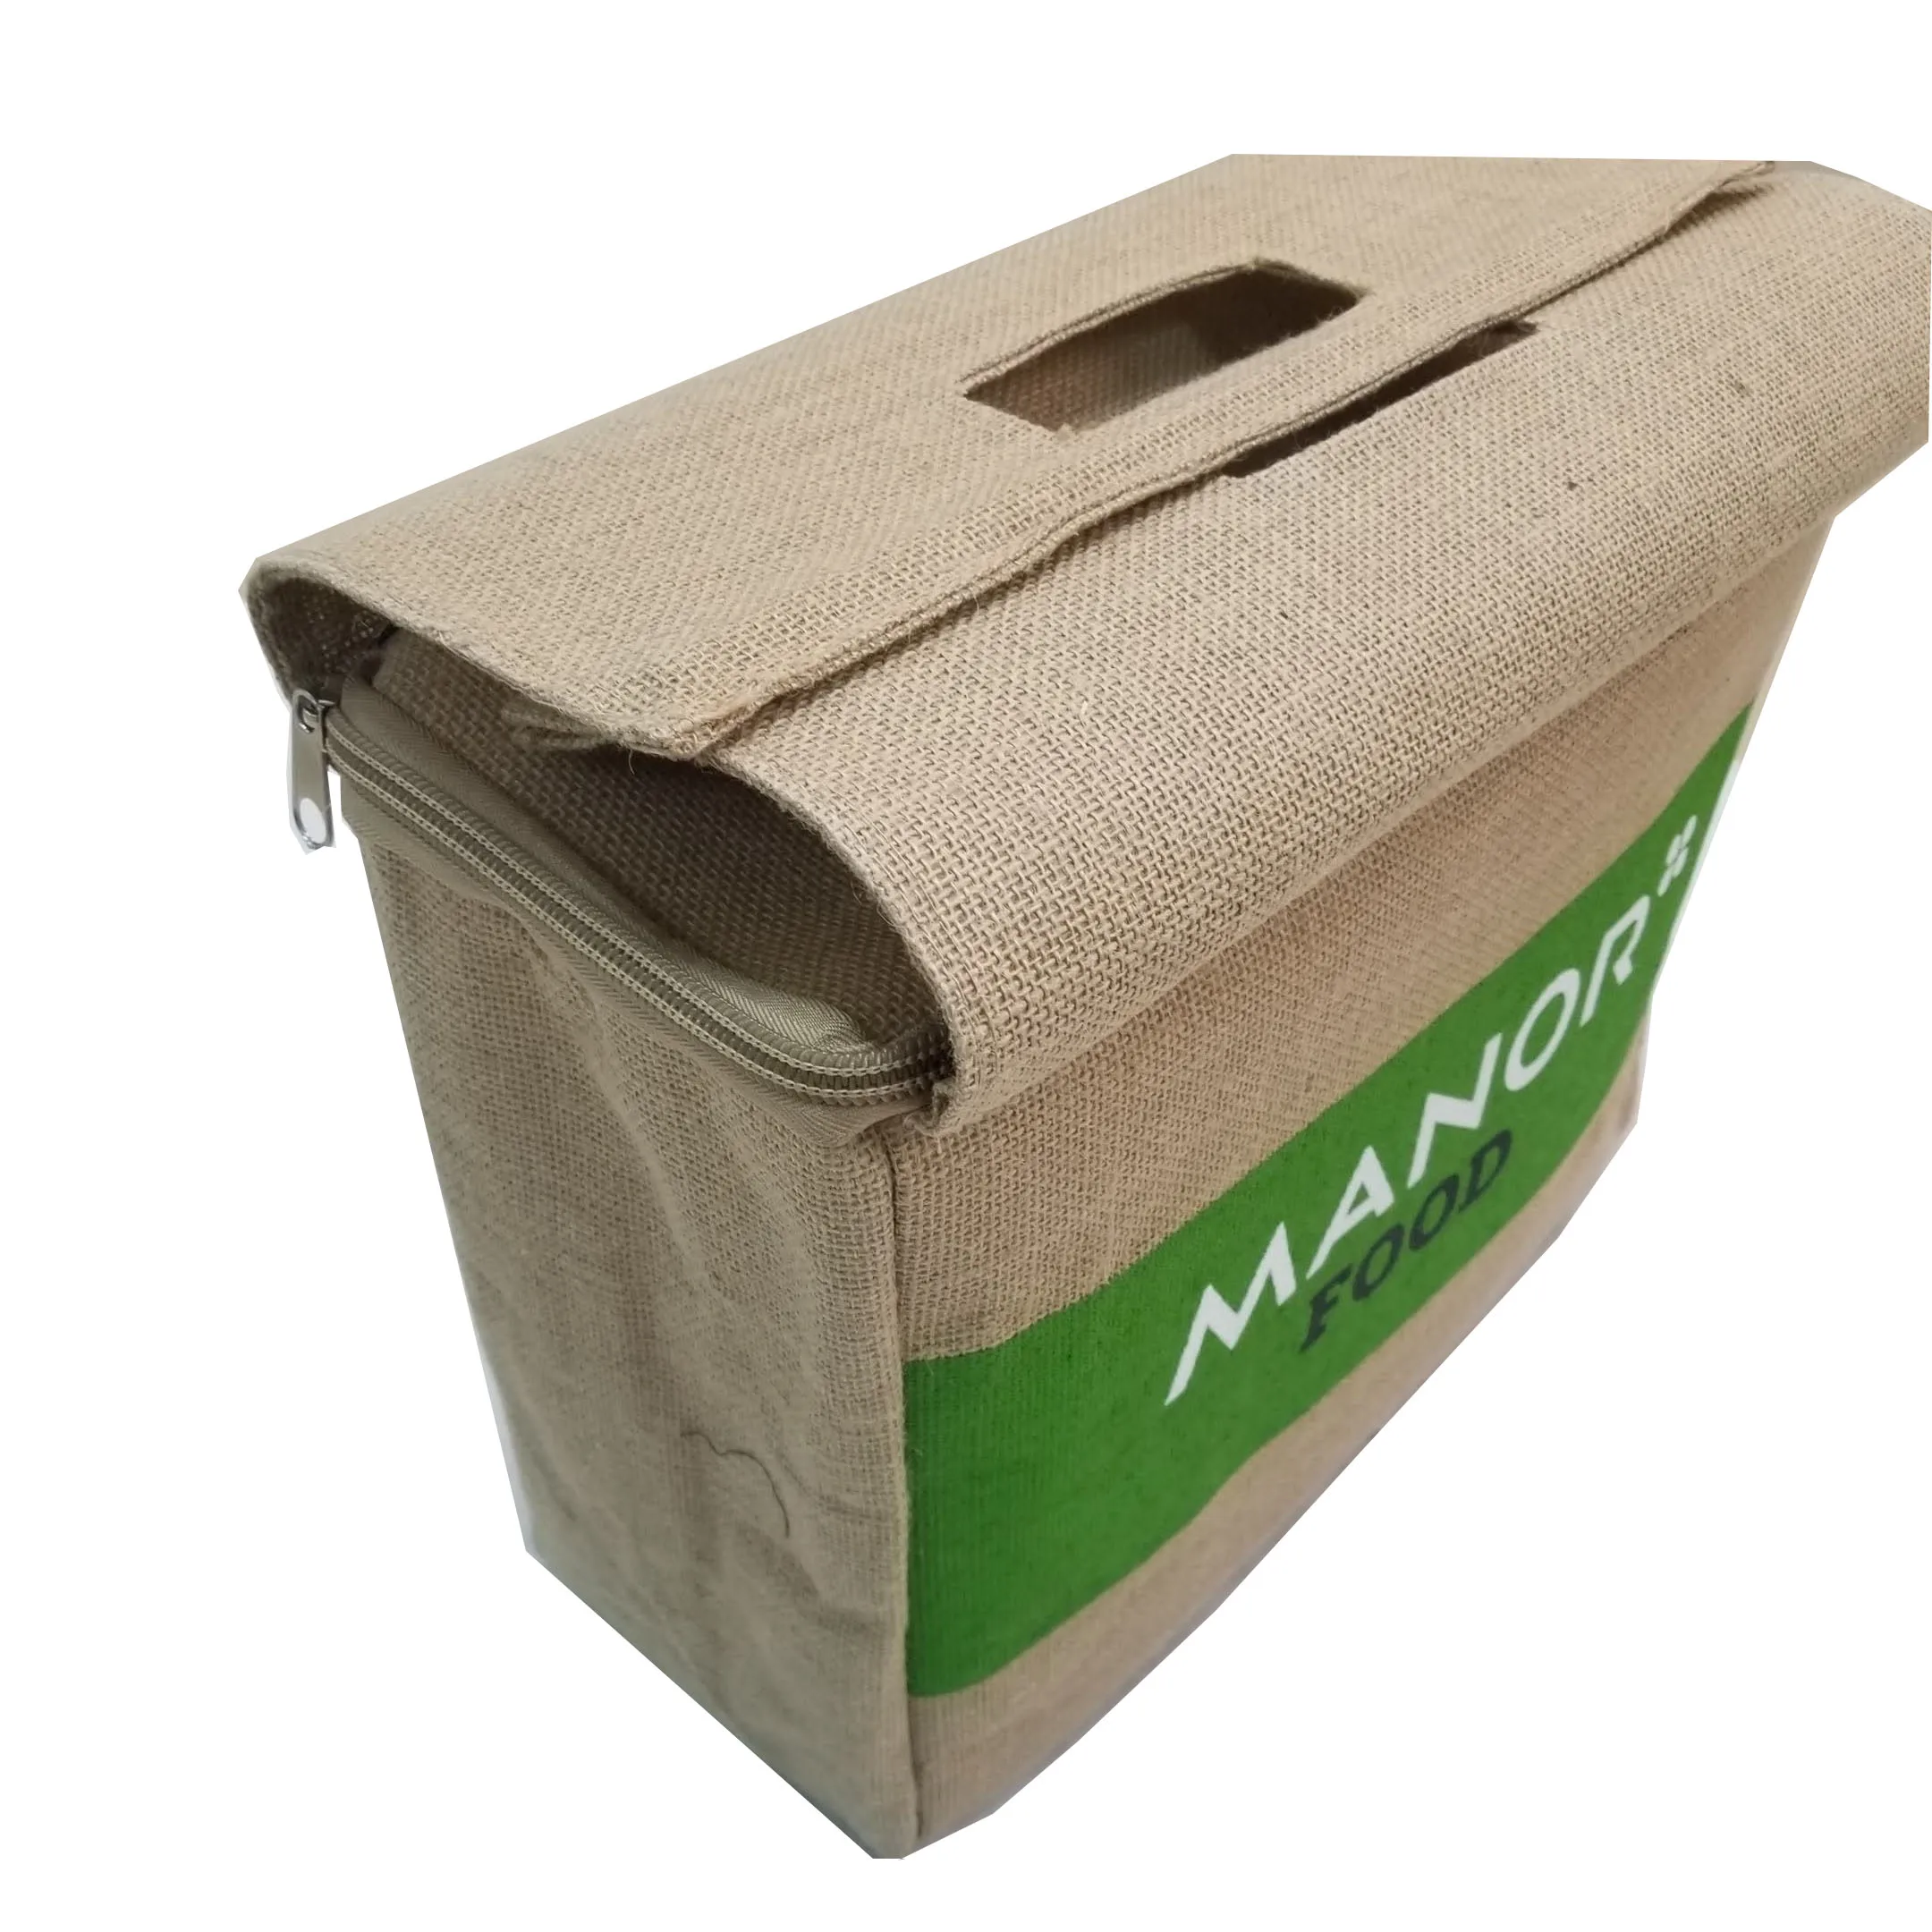 

Large Jute Insulated Shopping Grocery Bags W Zipper TOP Lid Thermal Cooler Tote Accept Customized Logo Cotton Packing Punch, Undyed nature color or customized